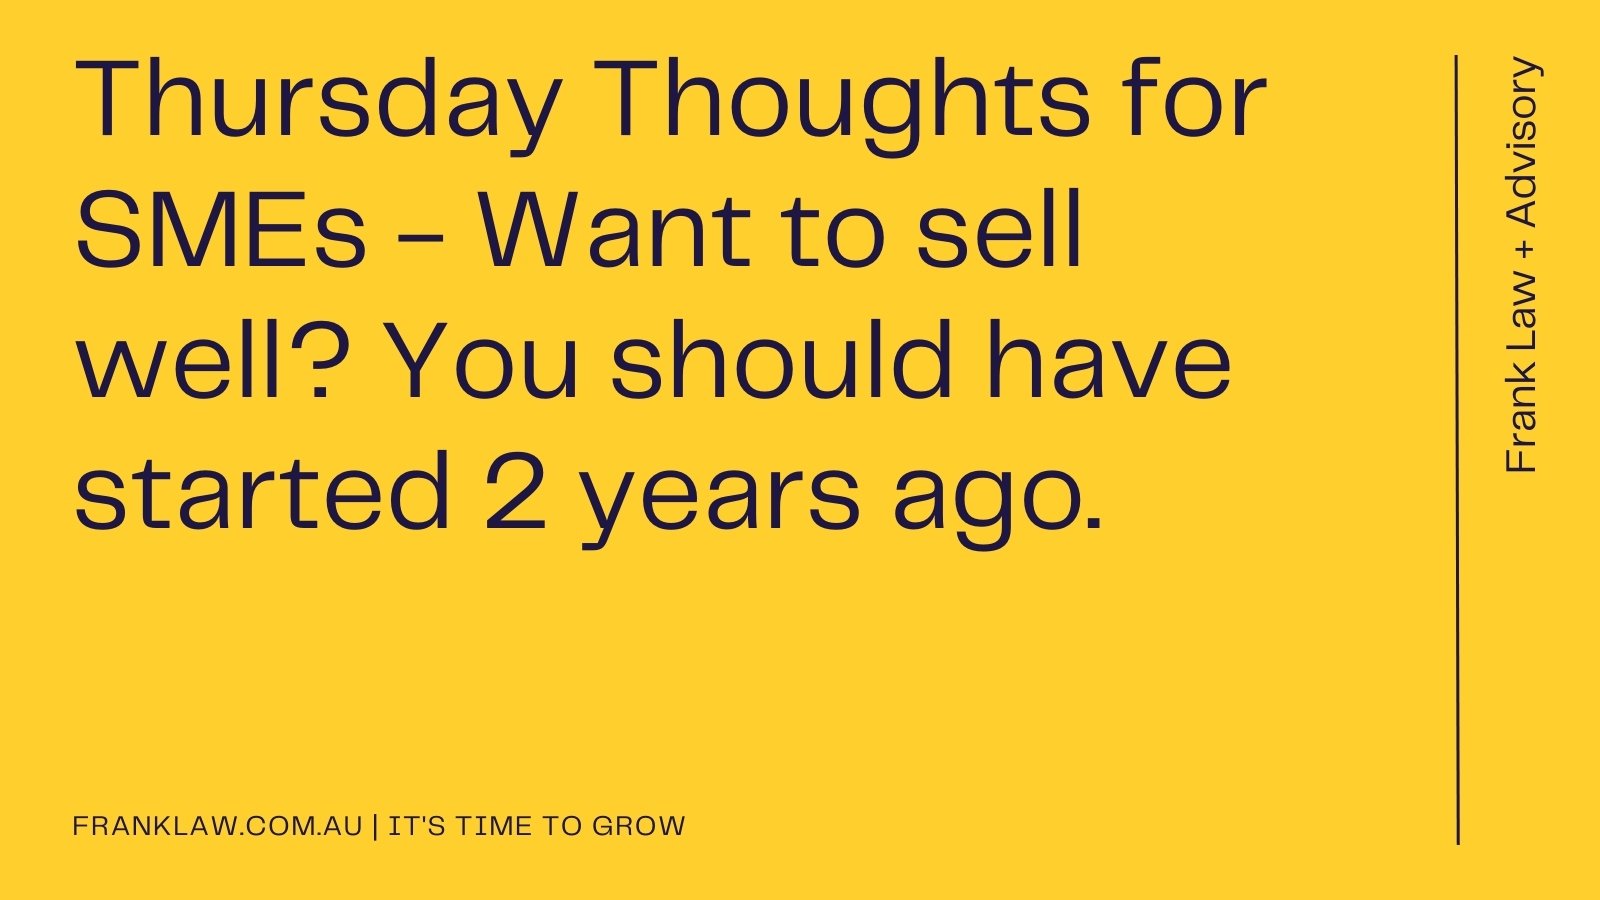 Thursday Thoughts for SMEs: Want to sell well? You should have started 2 years ago.